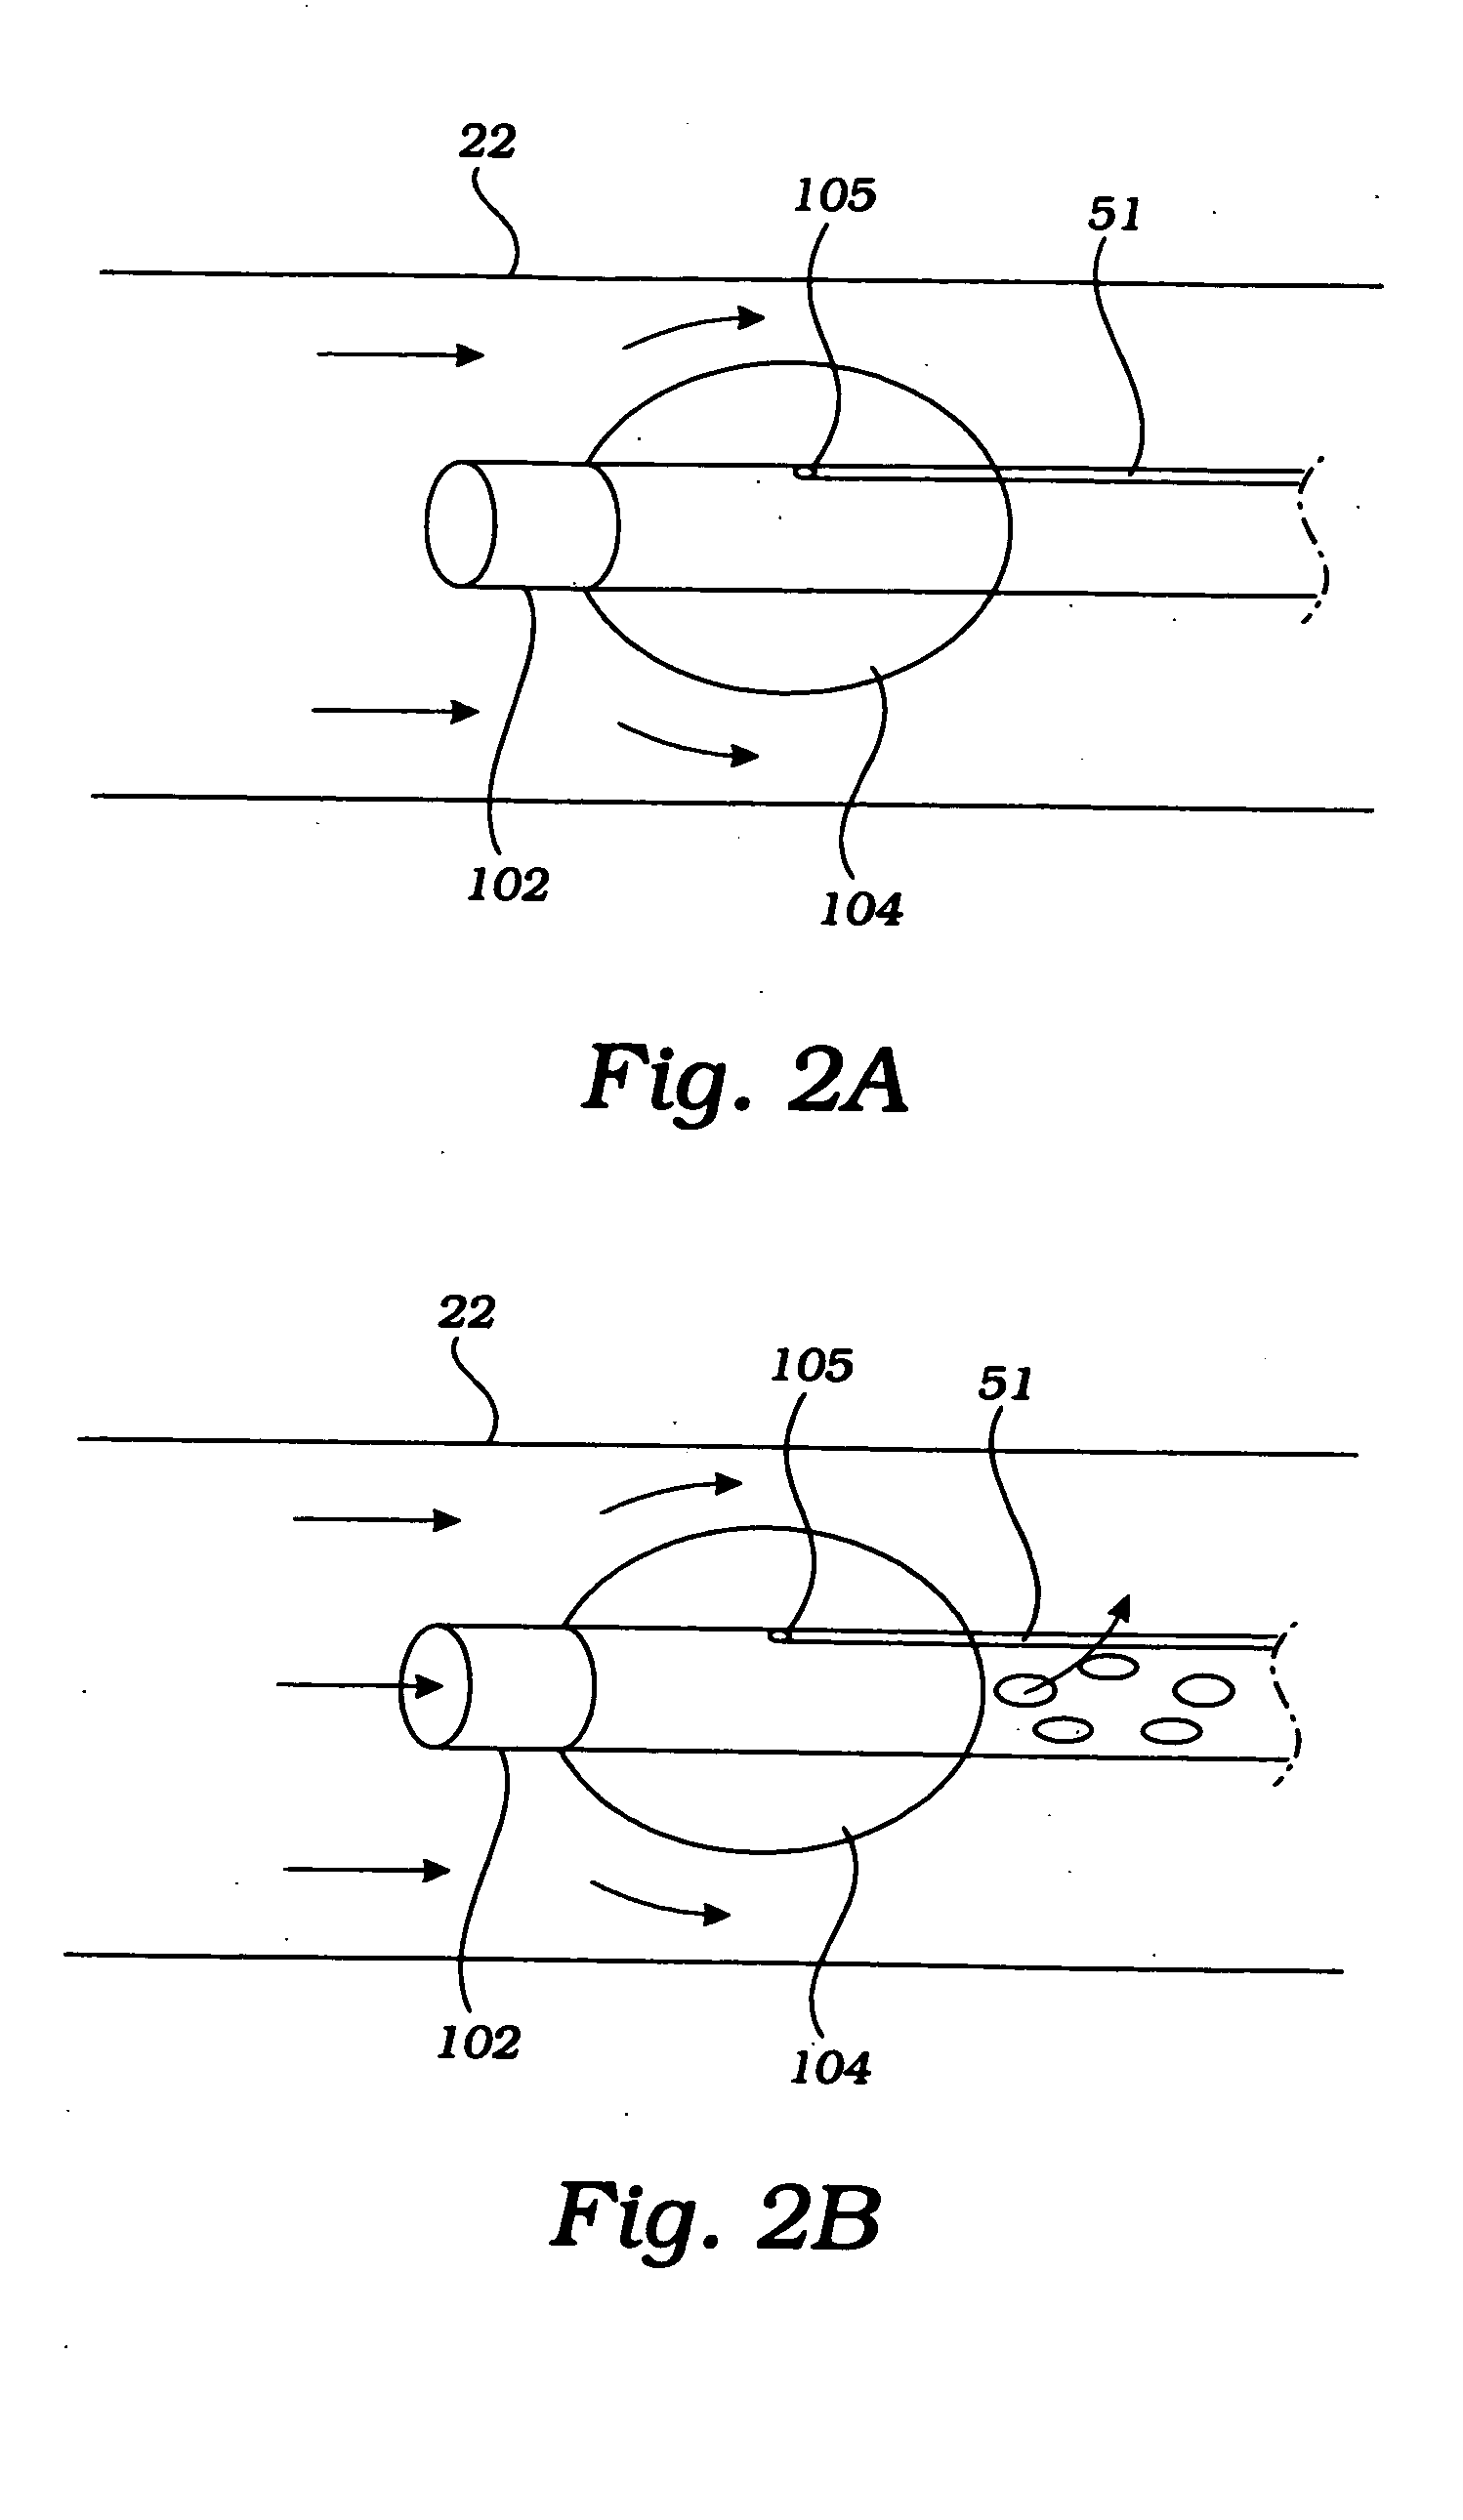 Partial aortic occlusion devices and methods for cerebral perfusion augmentation